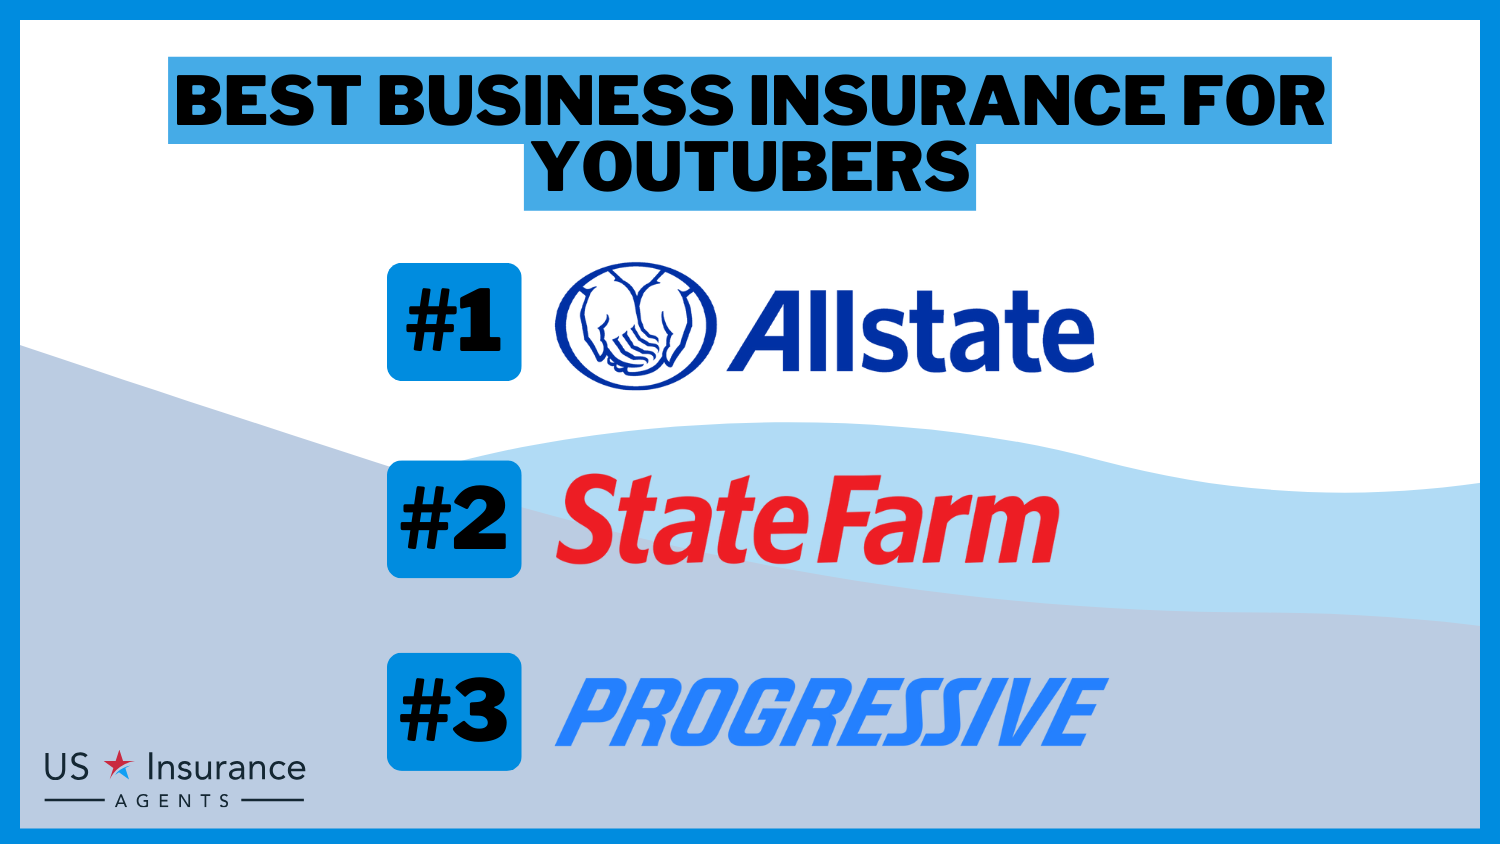 3 Best Business Insurance for YouTubers: Allstate, State Farm, and Progressive